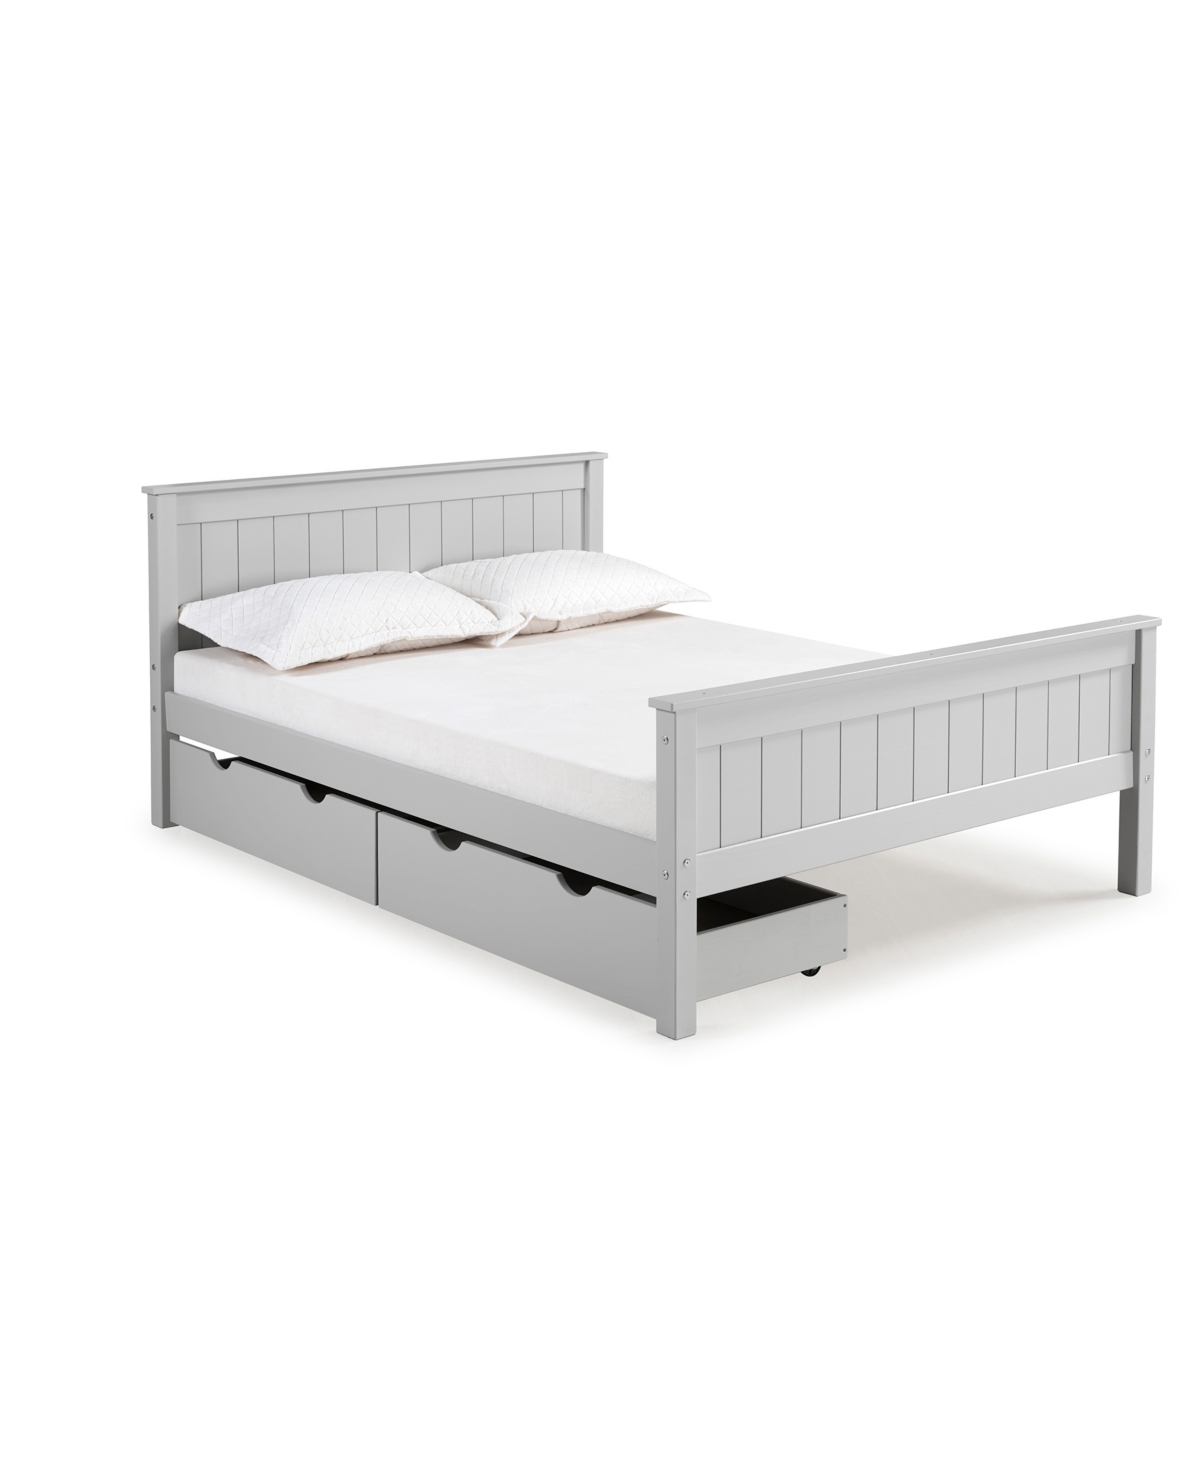 ALATERRE FURNITURE HARMONY FULL BED WITH STORAGE DRAWERS